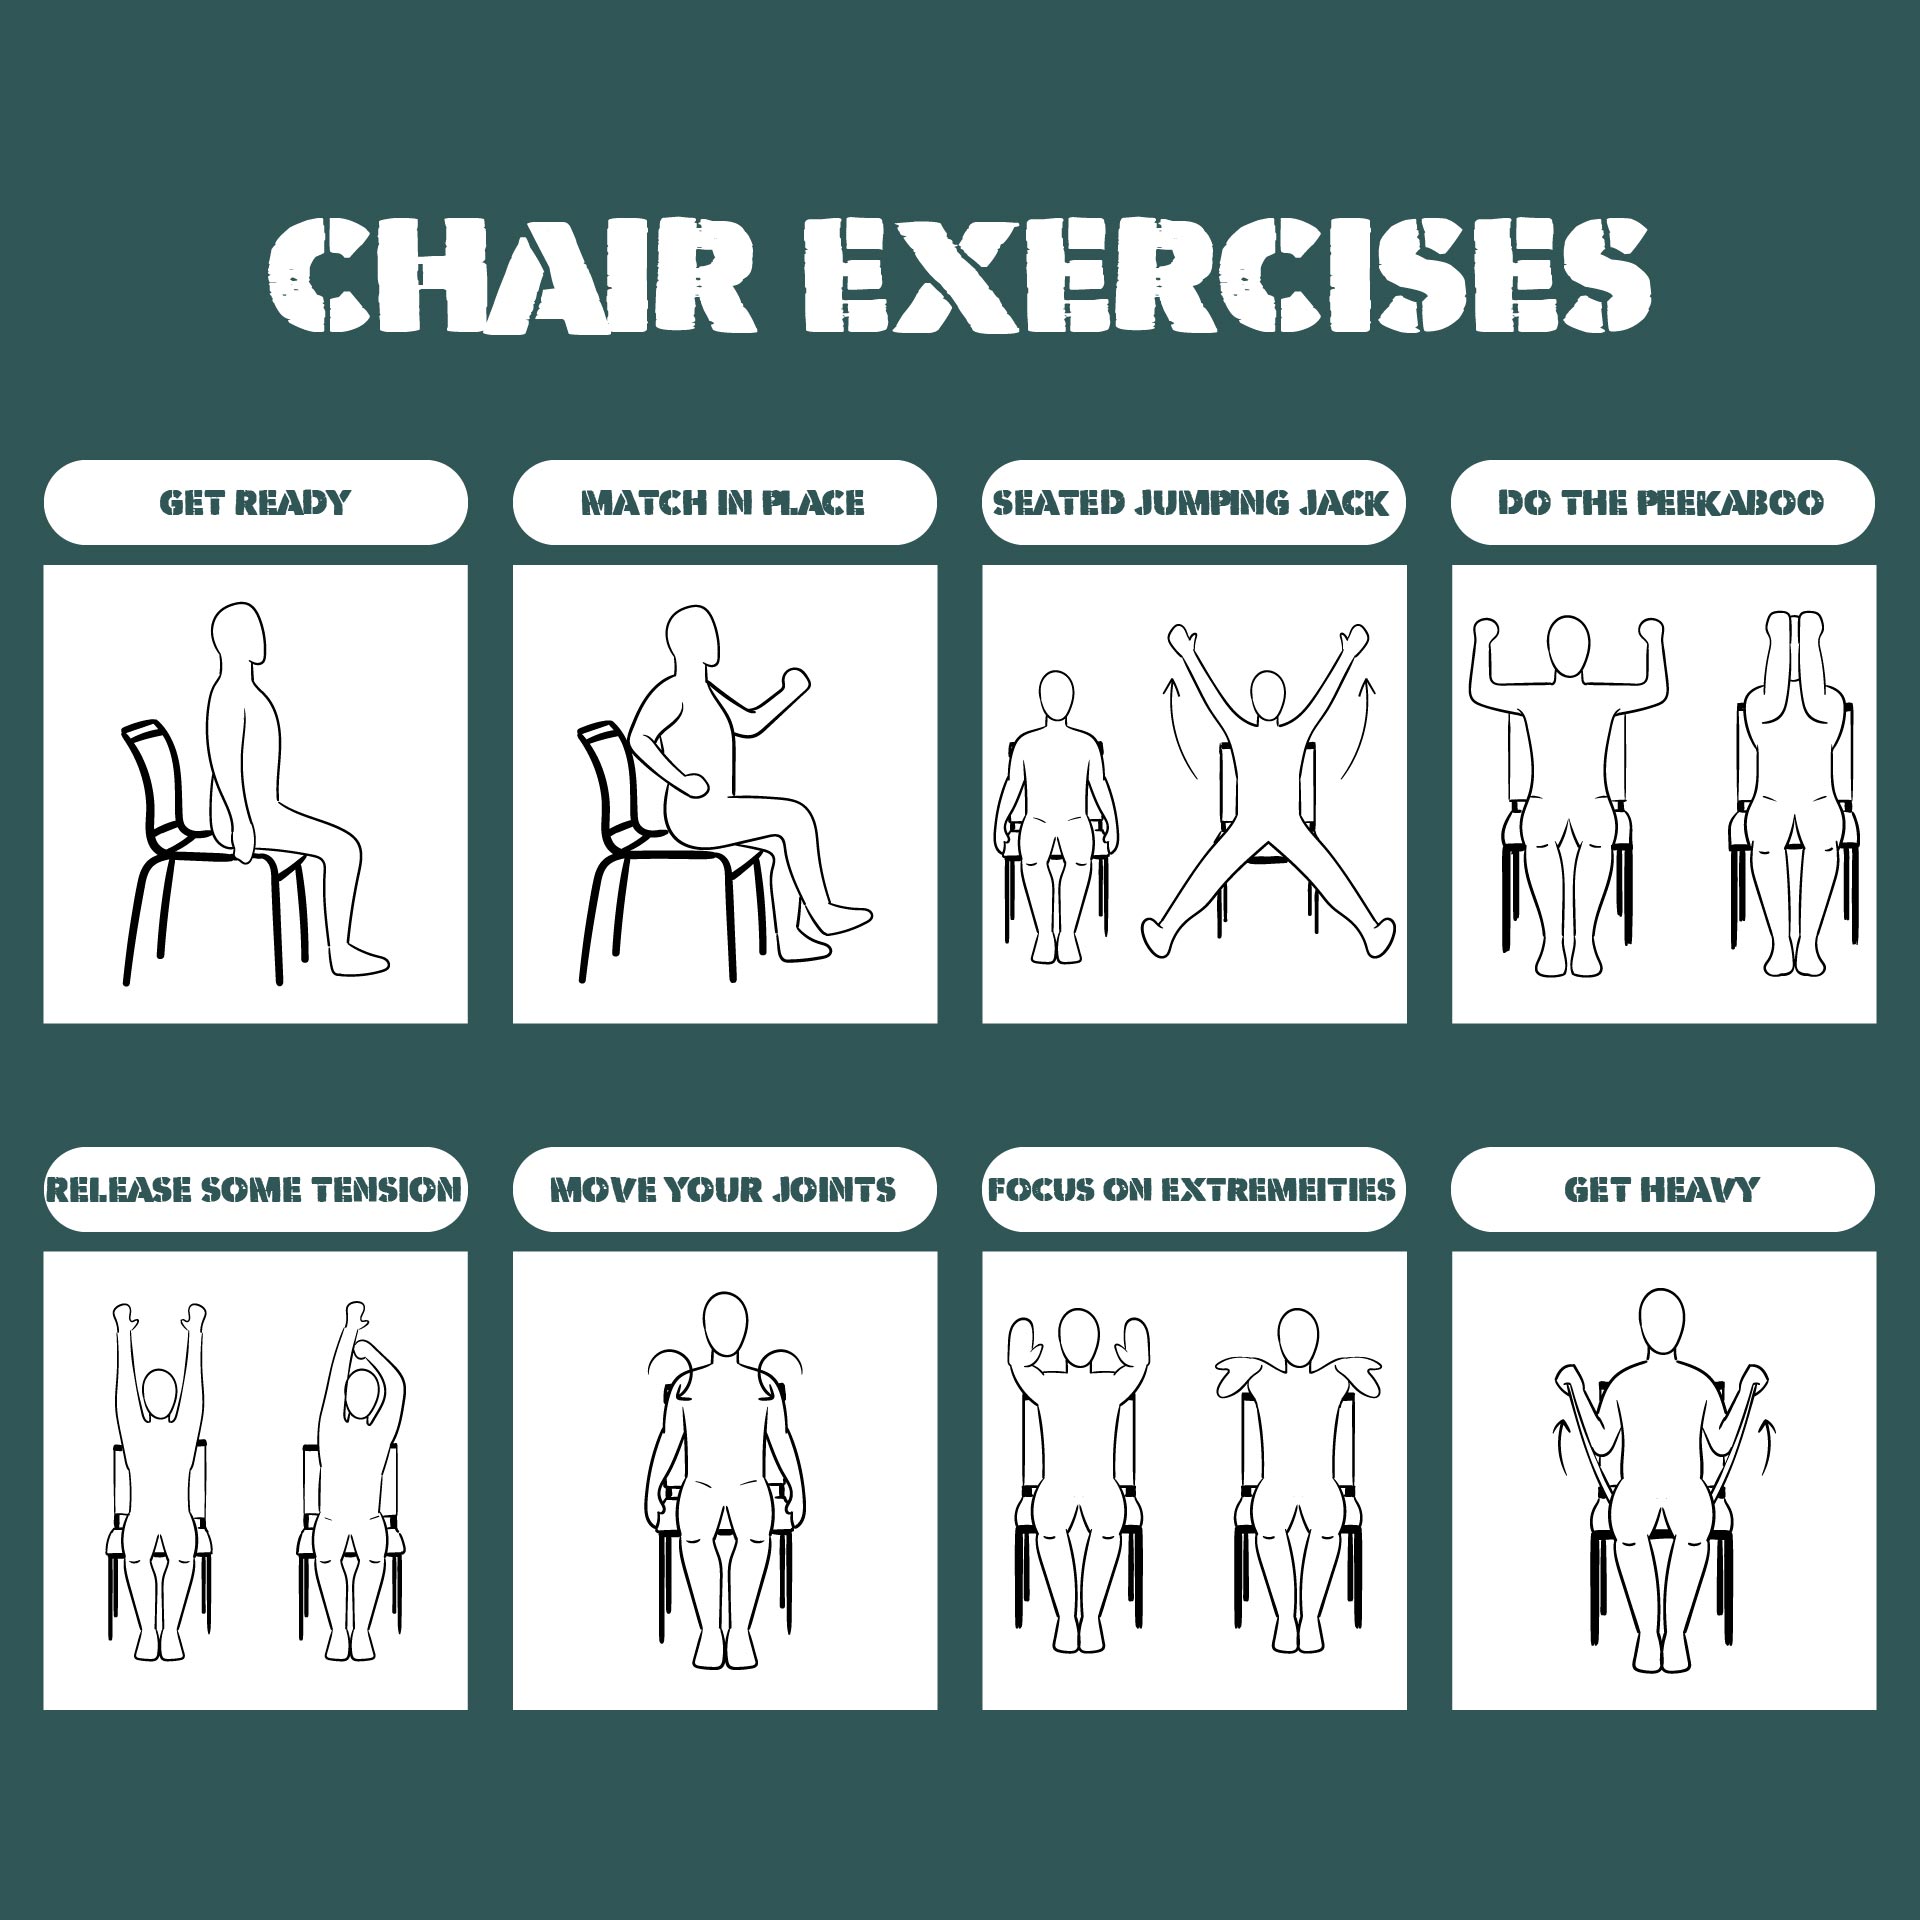 9 Best Images of Printable Chair Exercise Routines - Free Printable ...